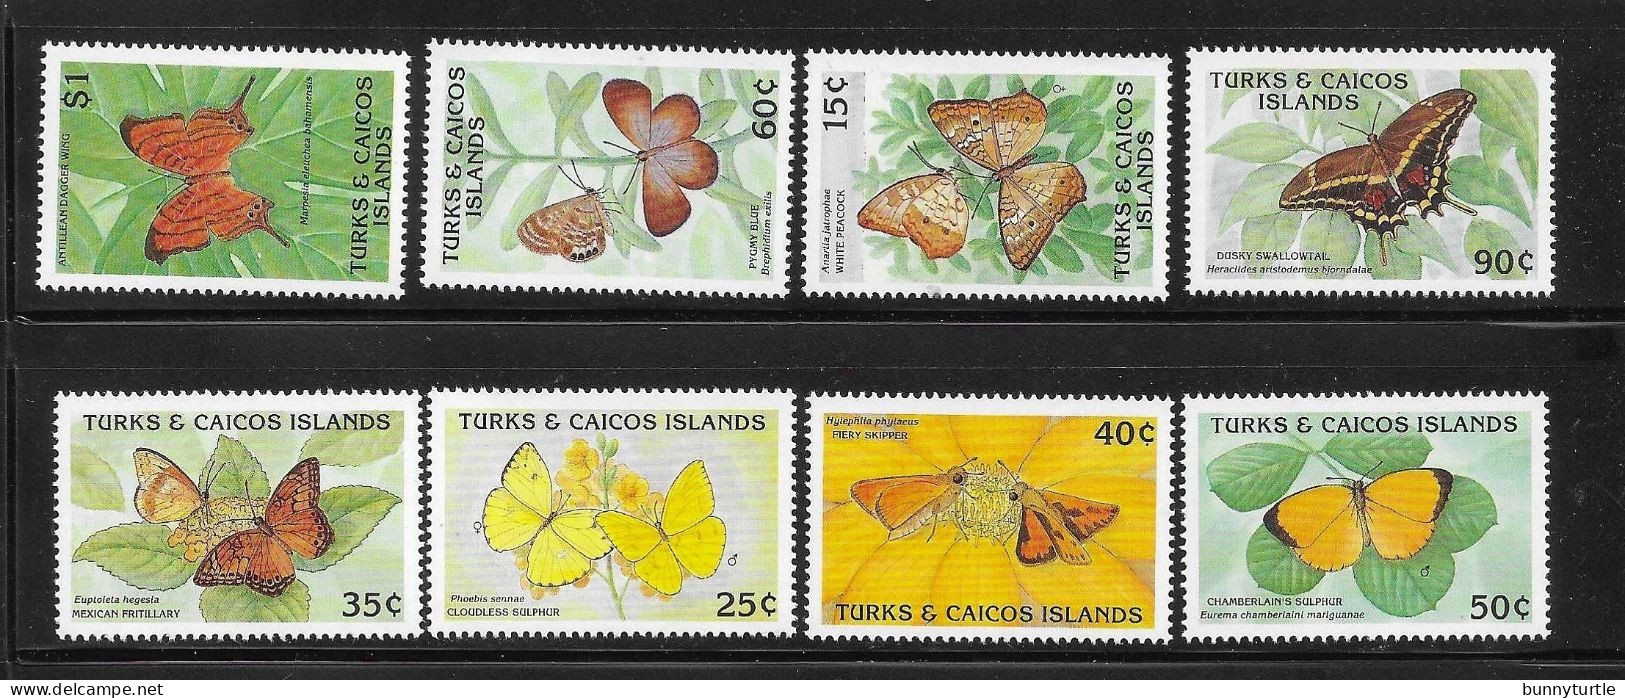 Turks And Caicos Islands 1990 Butterflies Butterfly MNH - Turks And Caicos